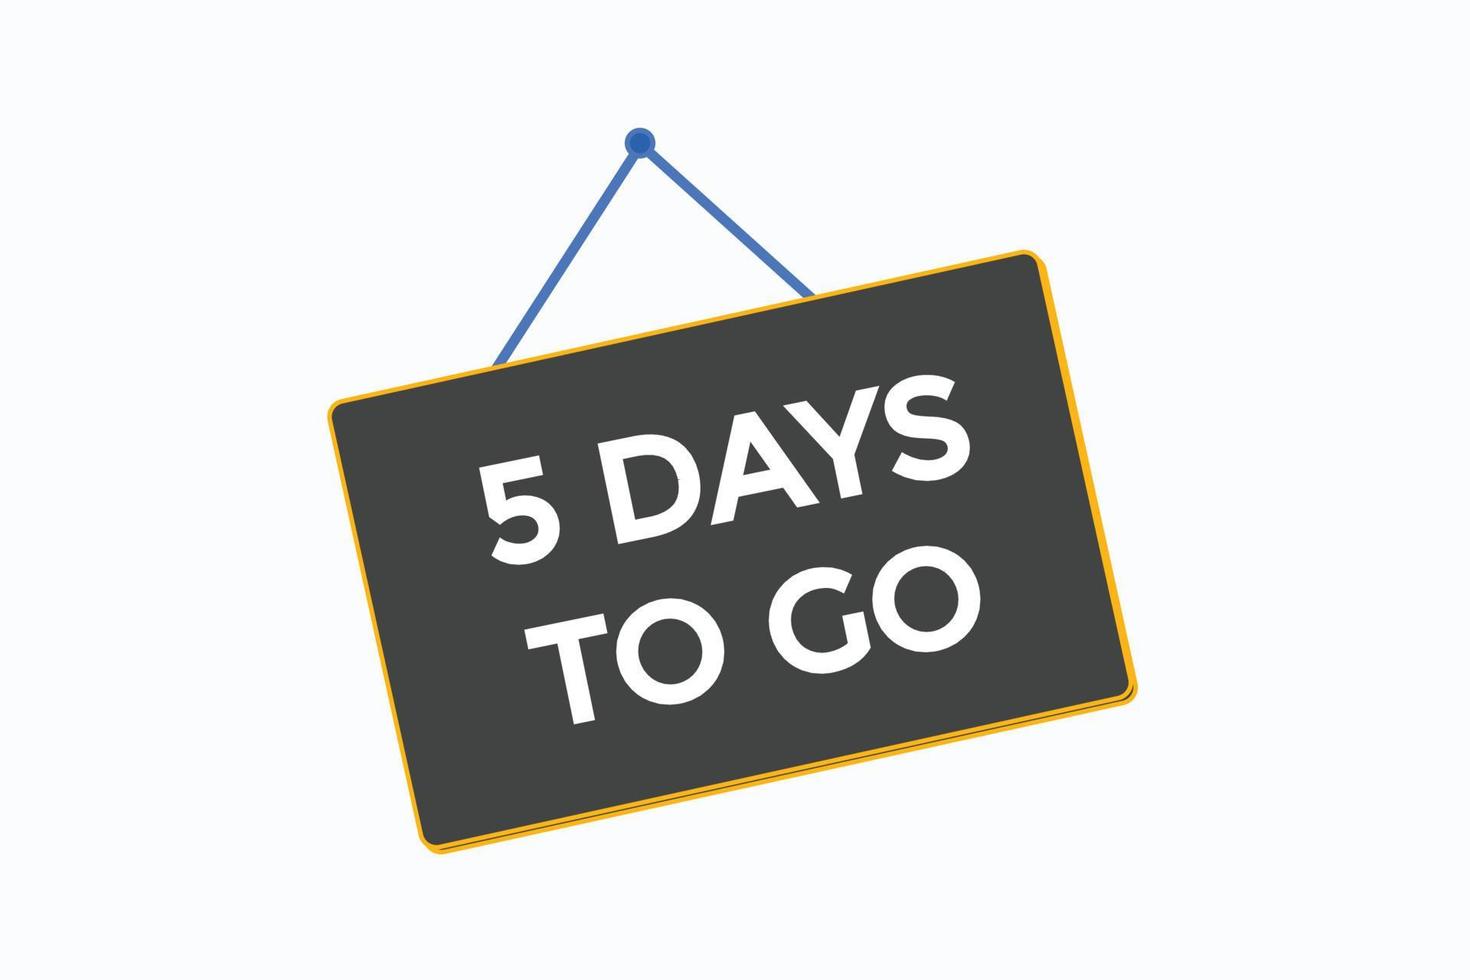 5 days to go warranty button vectors.sign label speech bubble 5 days to go vector